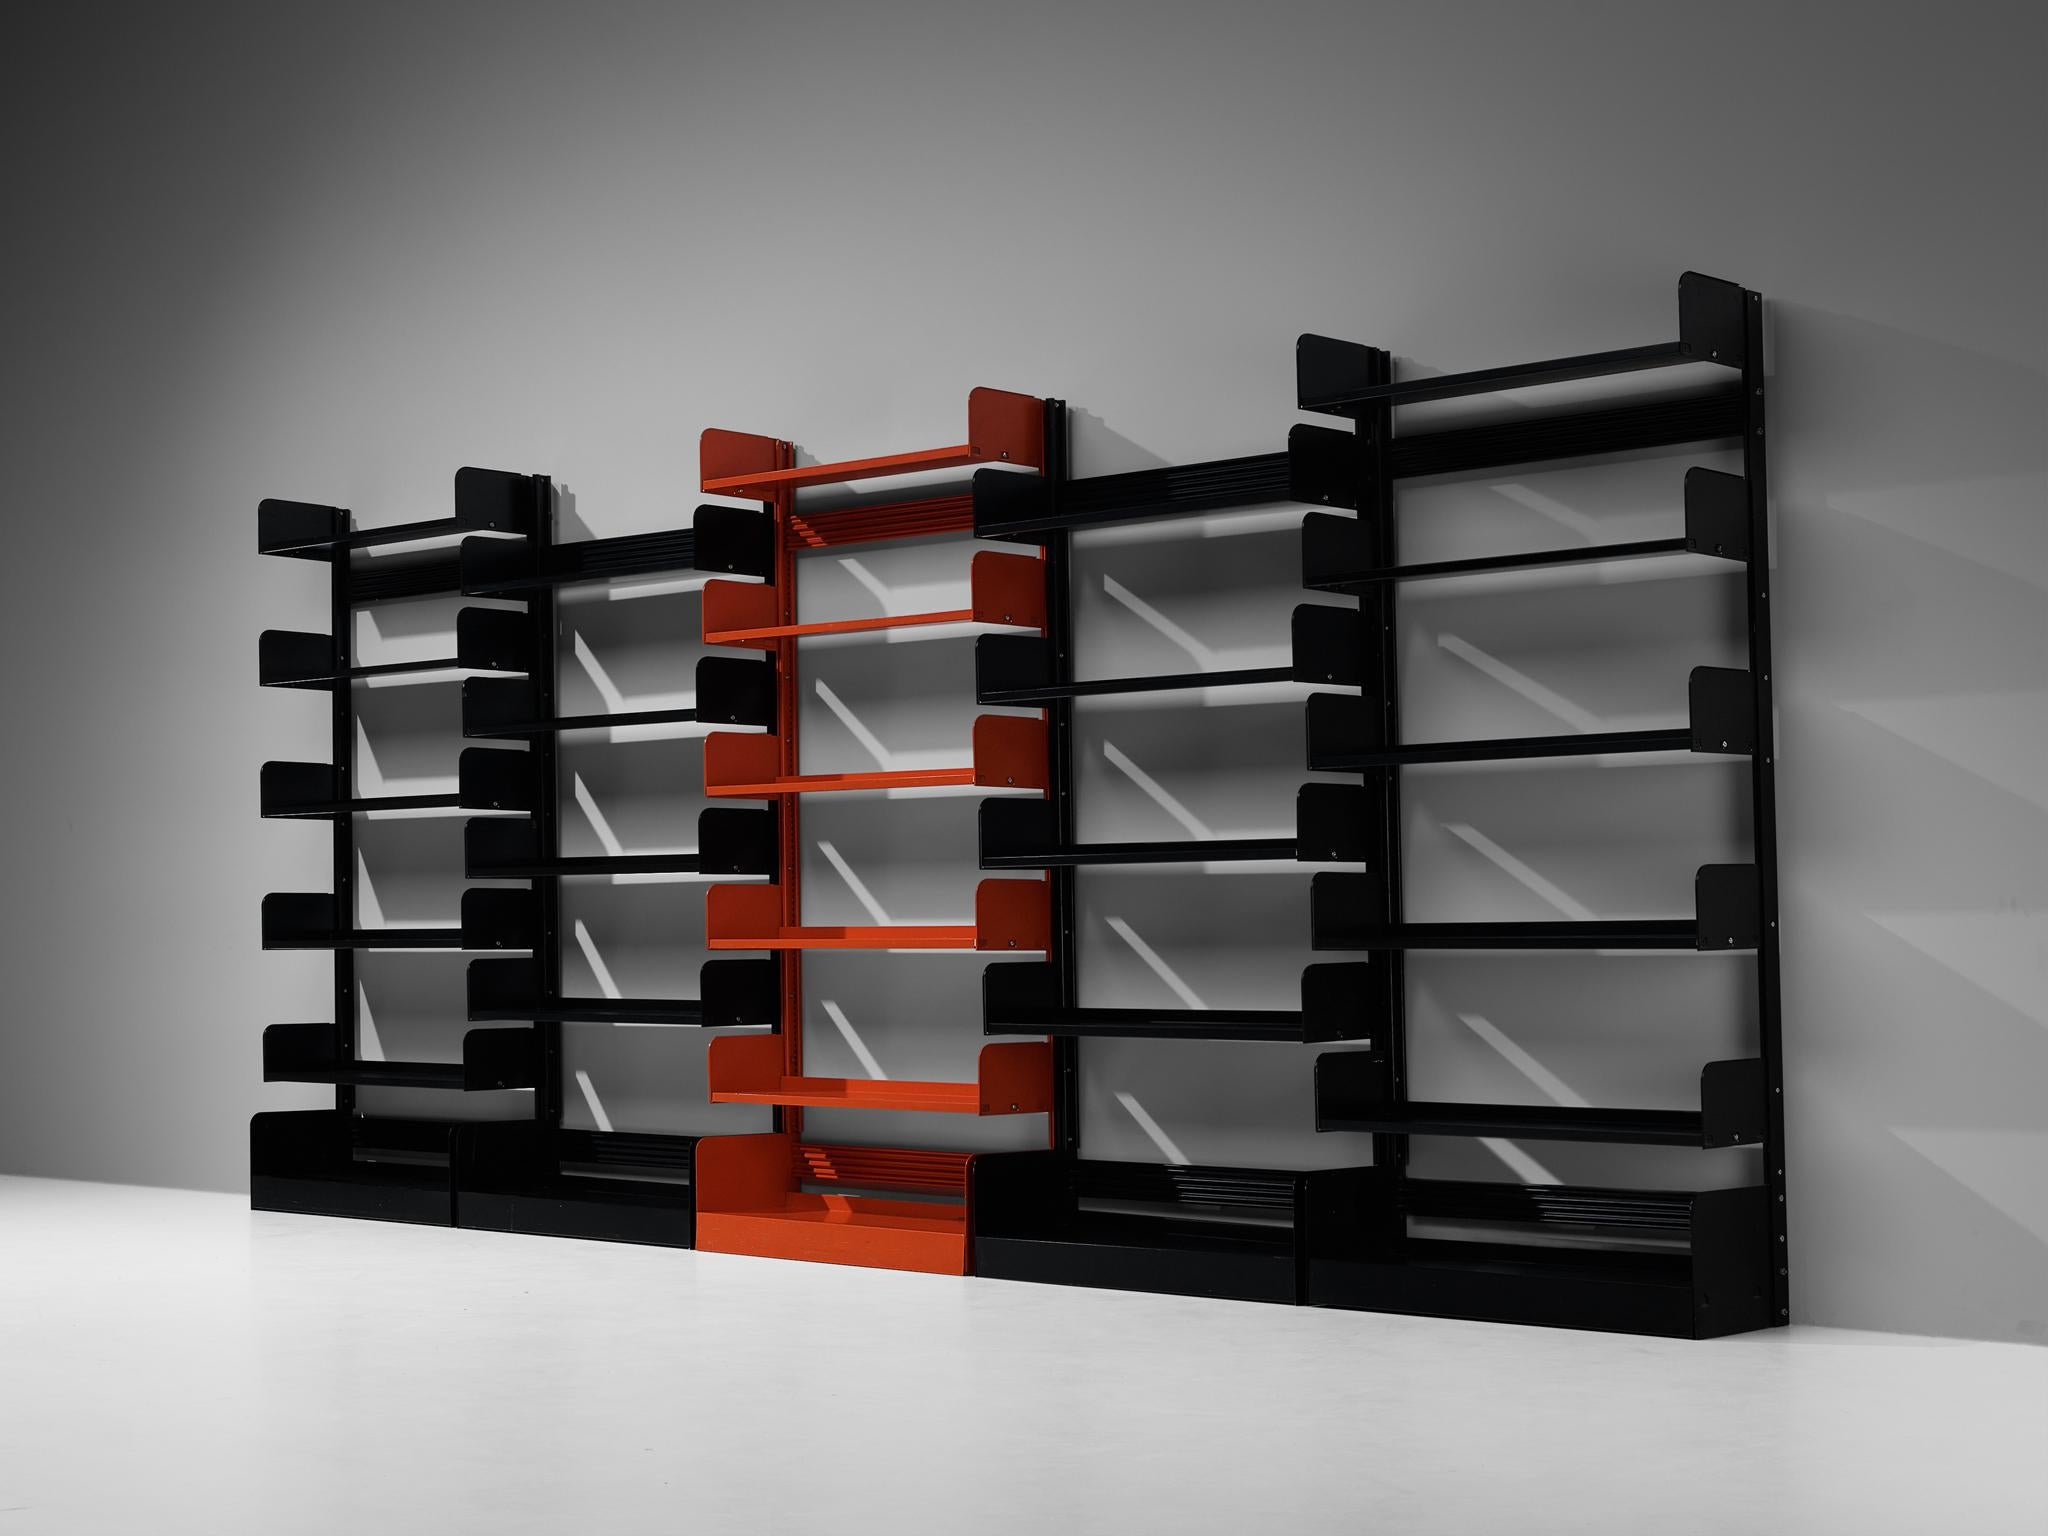 Lips Vago, 'Congresso' shelving units, black and red lacquered steel, Italy, 1960s.

Constructed from steel sheets, the 'Congresso' shelf is a sturdy yet unassuming bookcase that can be used on either side, making it a versatile addition to any